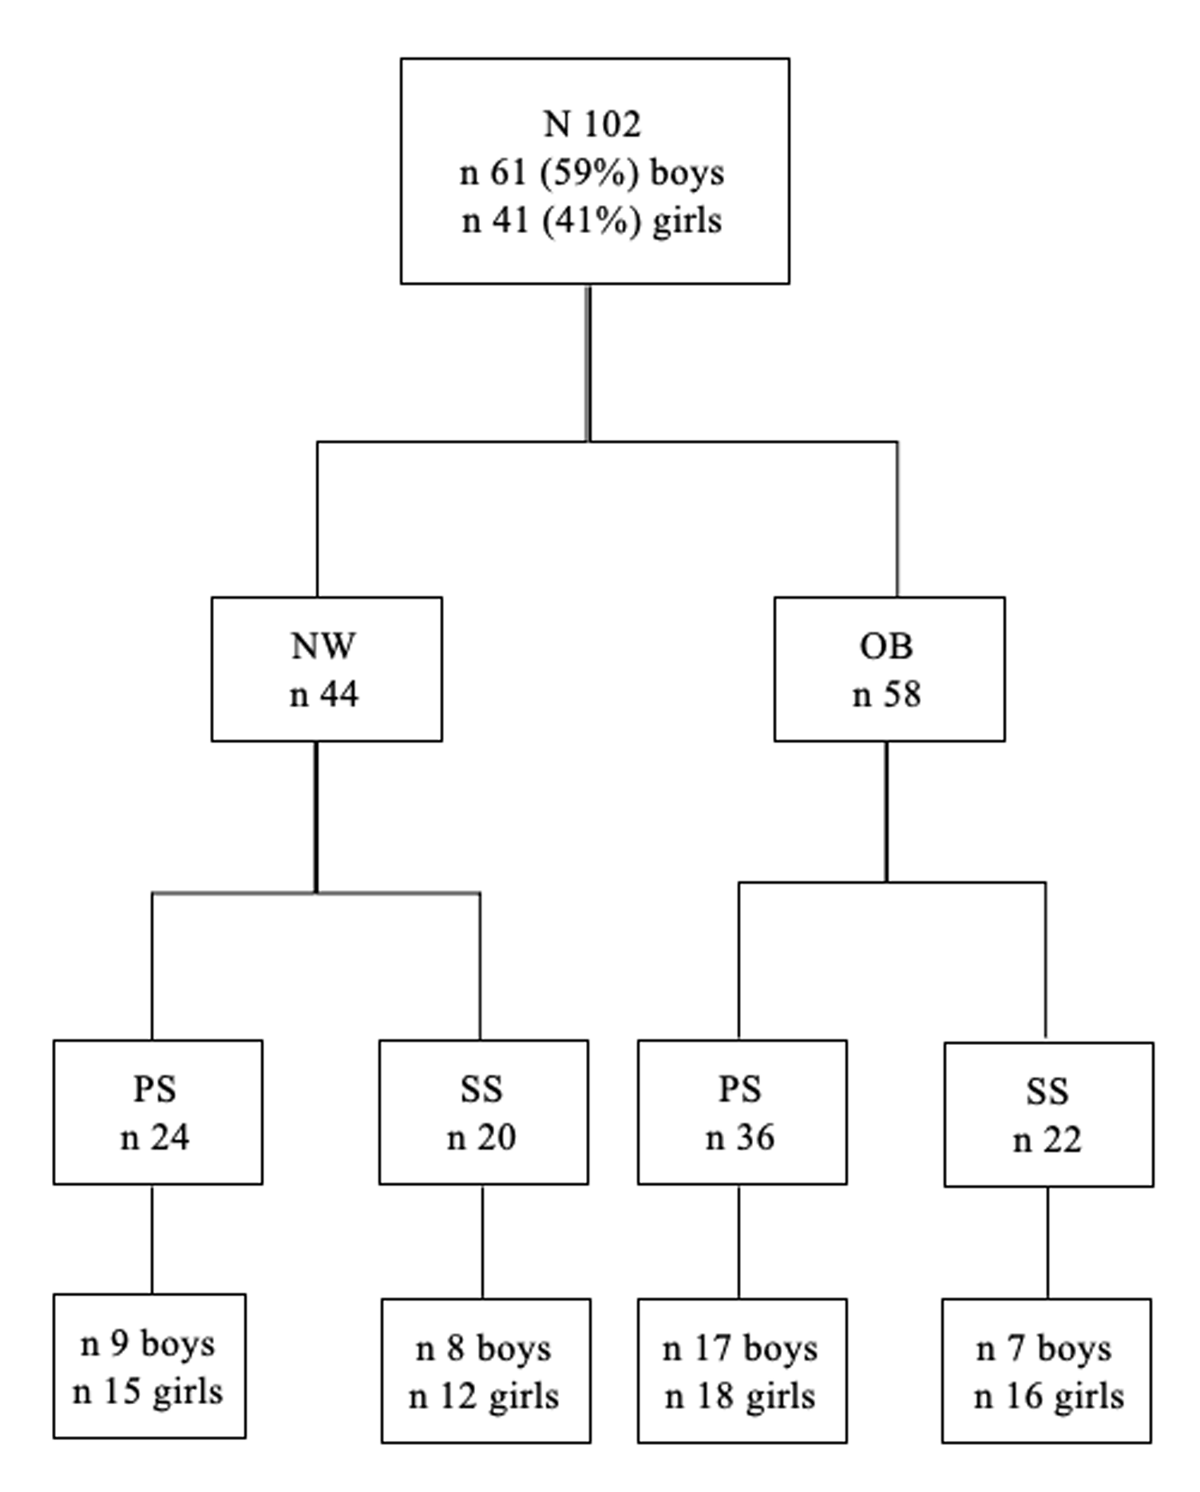 Flow chart depicting the sampling distribution comparison between the NW group and the OW group